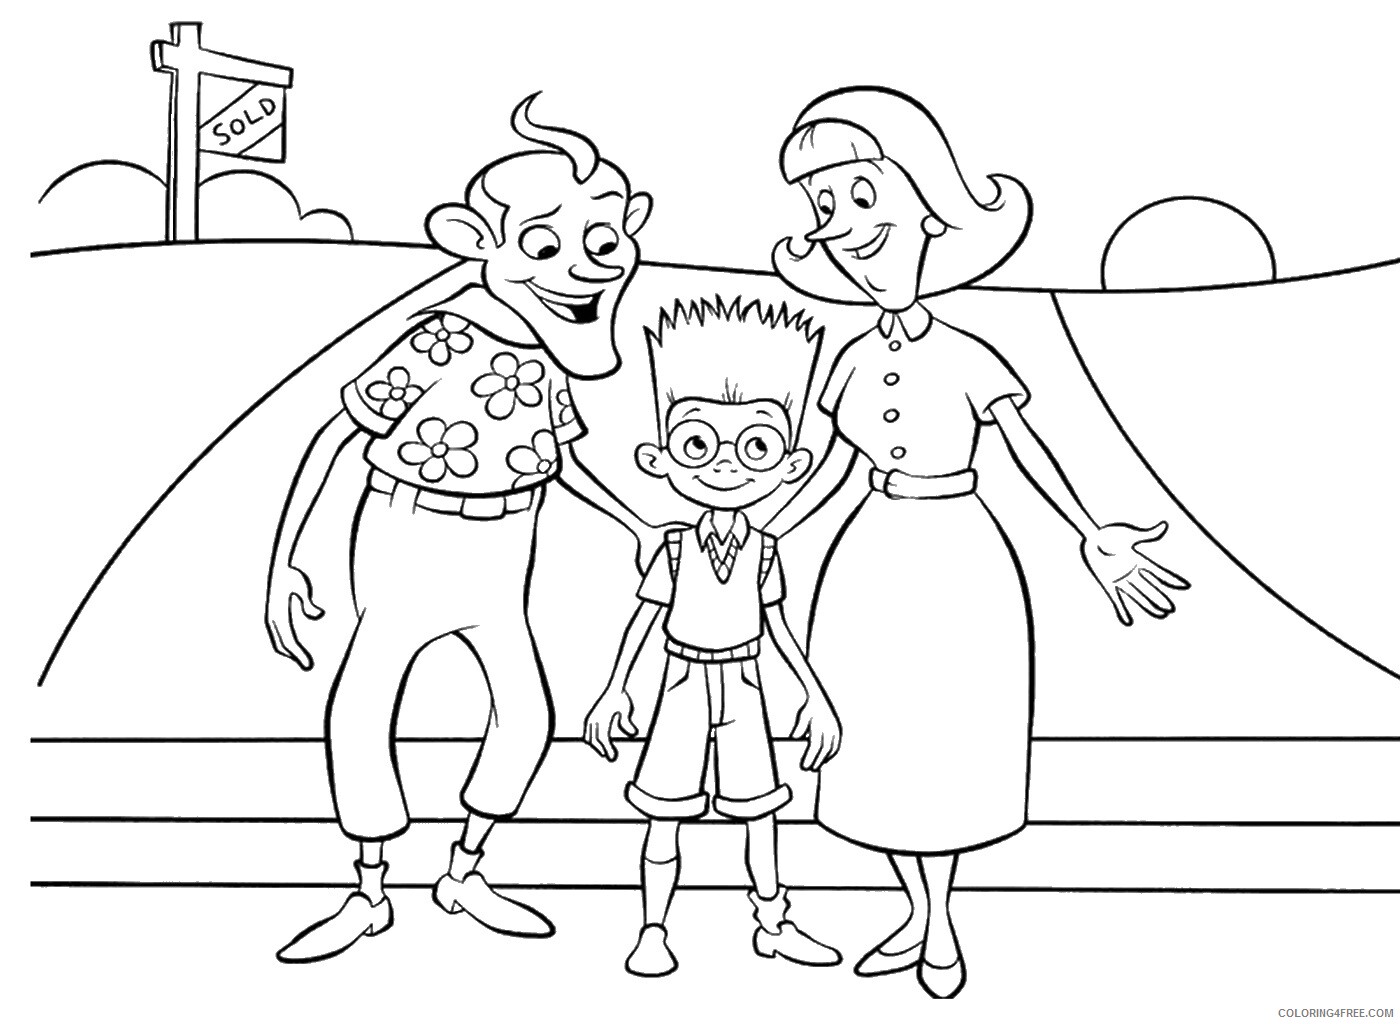 Meet the Robinsons Coloring Pages TV Film meet_the_robinsons Printable 2020 04955 Coloring4free